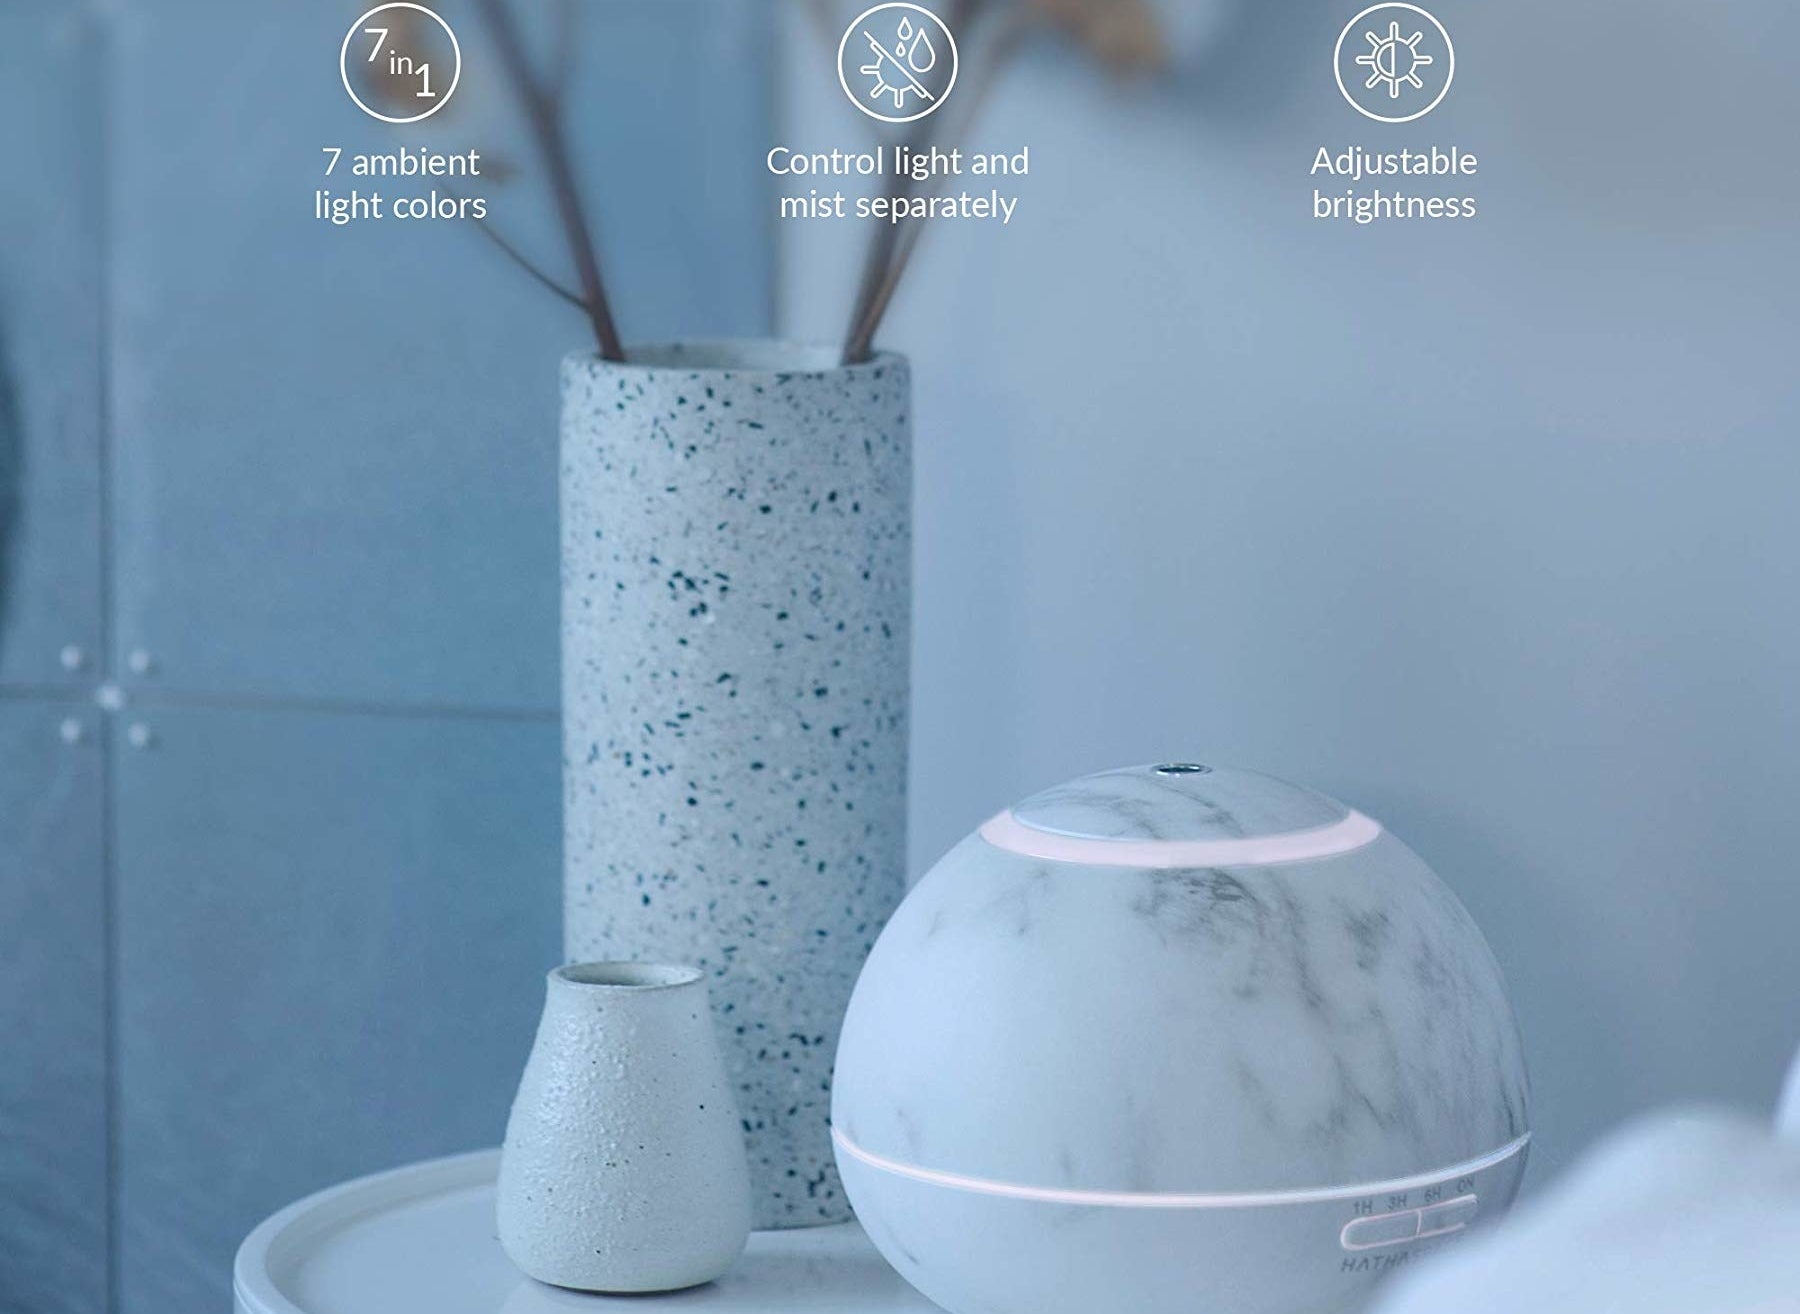 The marble-patterned aroma diffuser in white